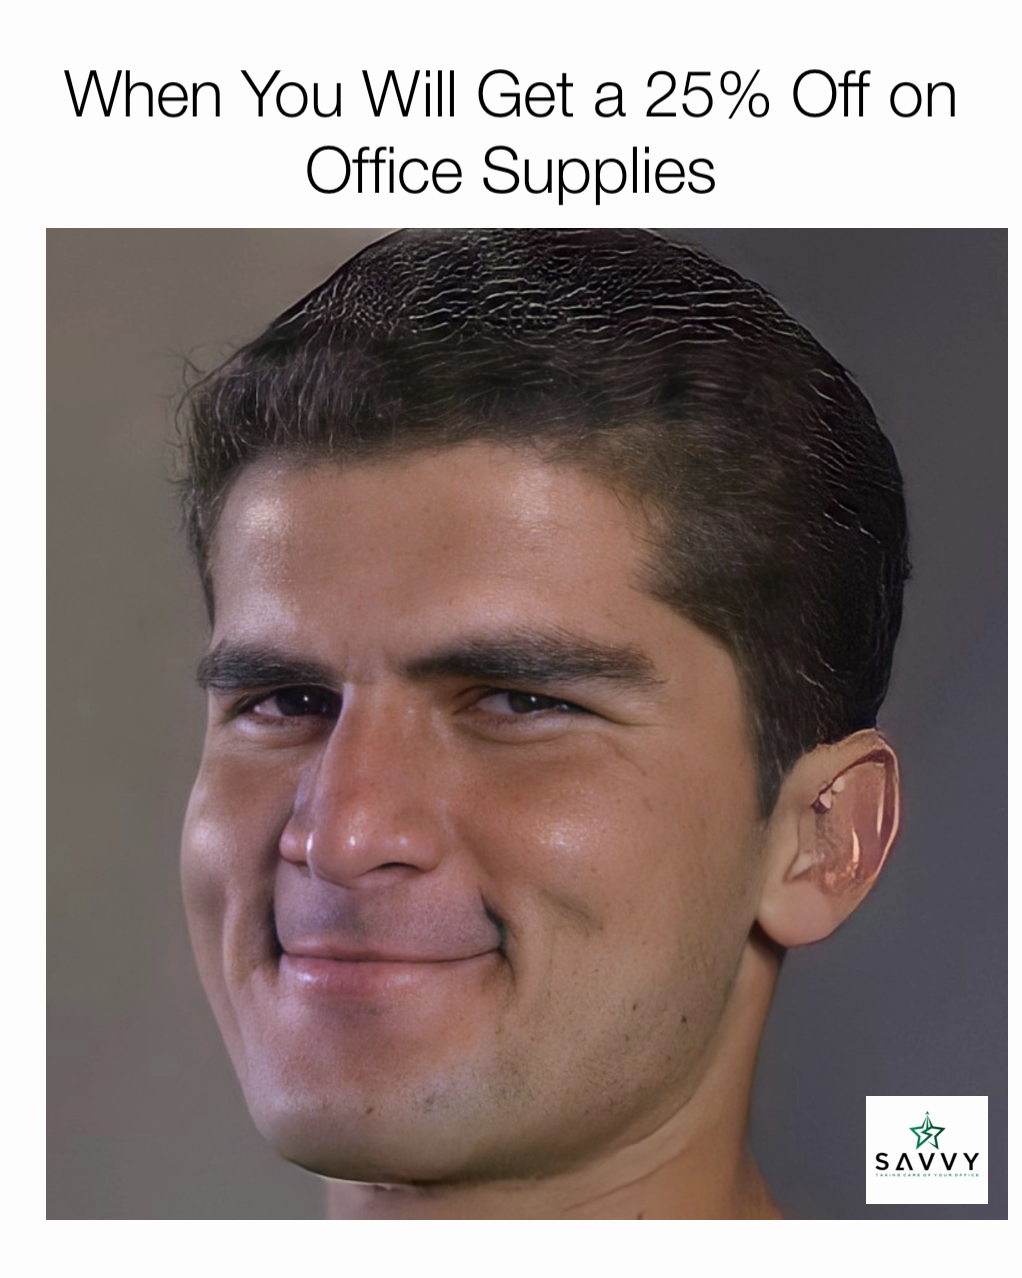 When You Will Get a 25% Off on Office Supplies